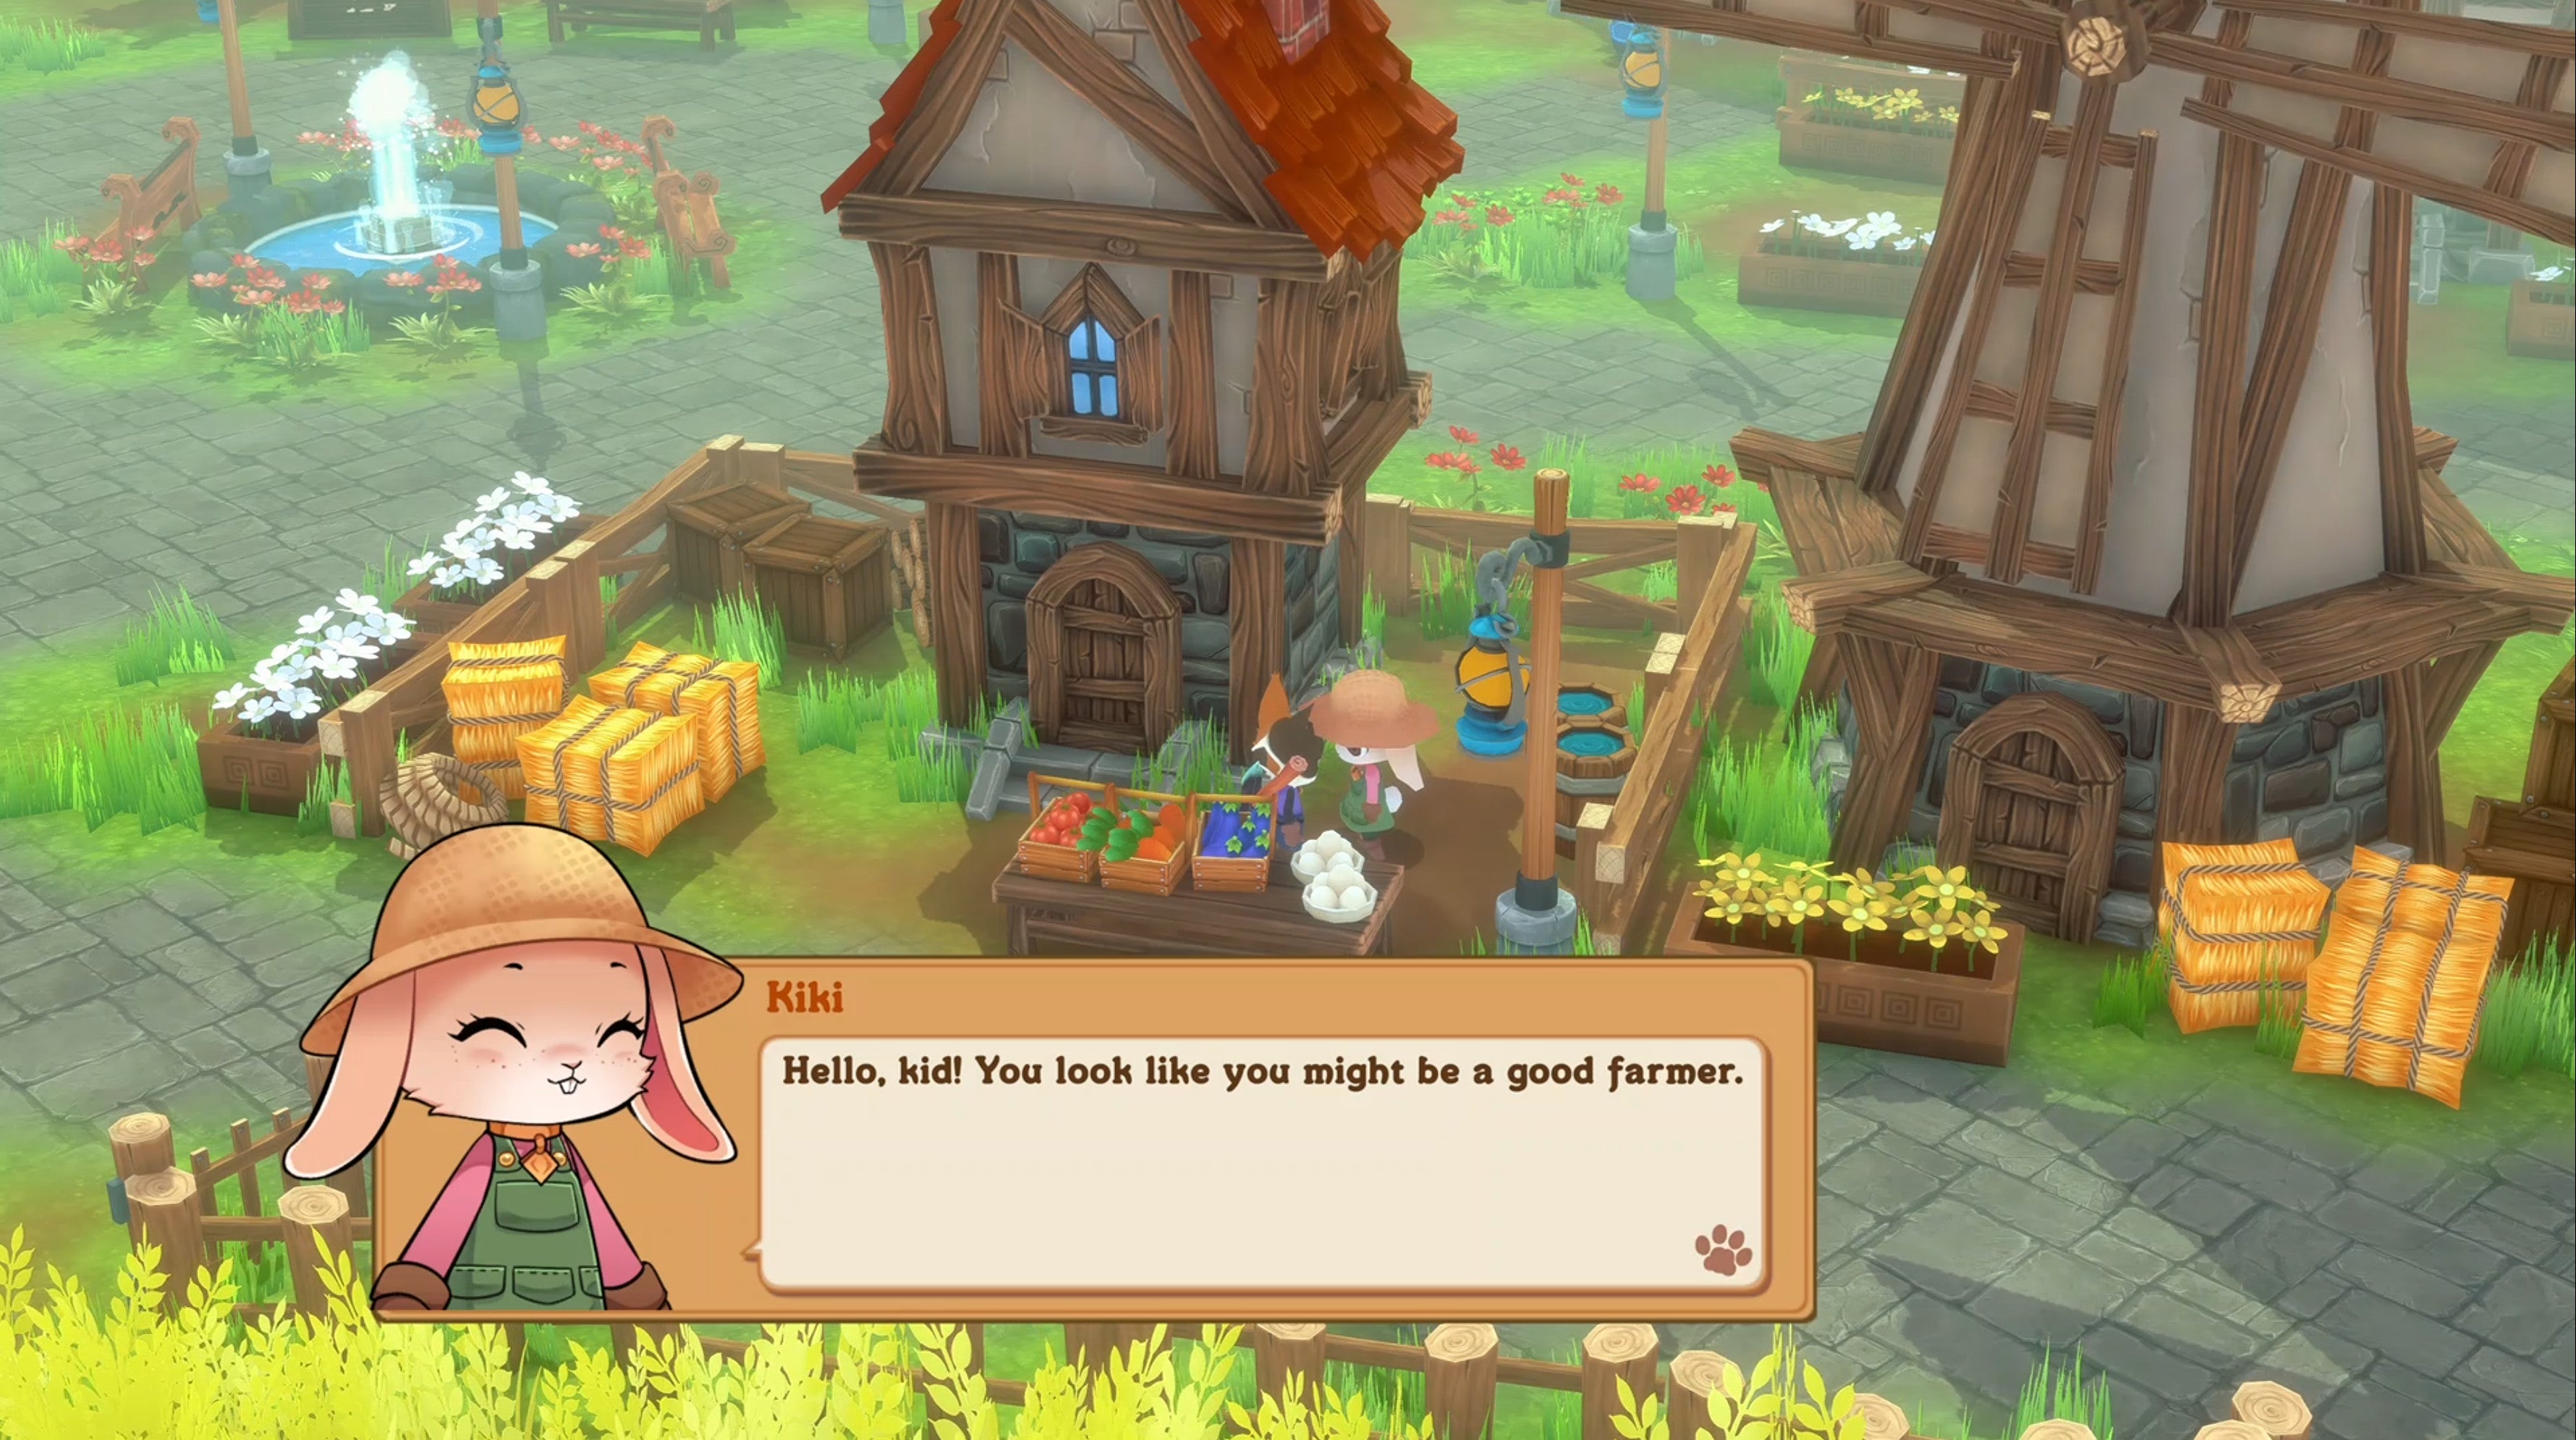 A screenshot of Kitaria Fables showing a cute house, windmill, and a rabbit who is telling the player - a cat - that they look like they would be a good farmer.